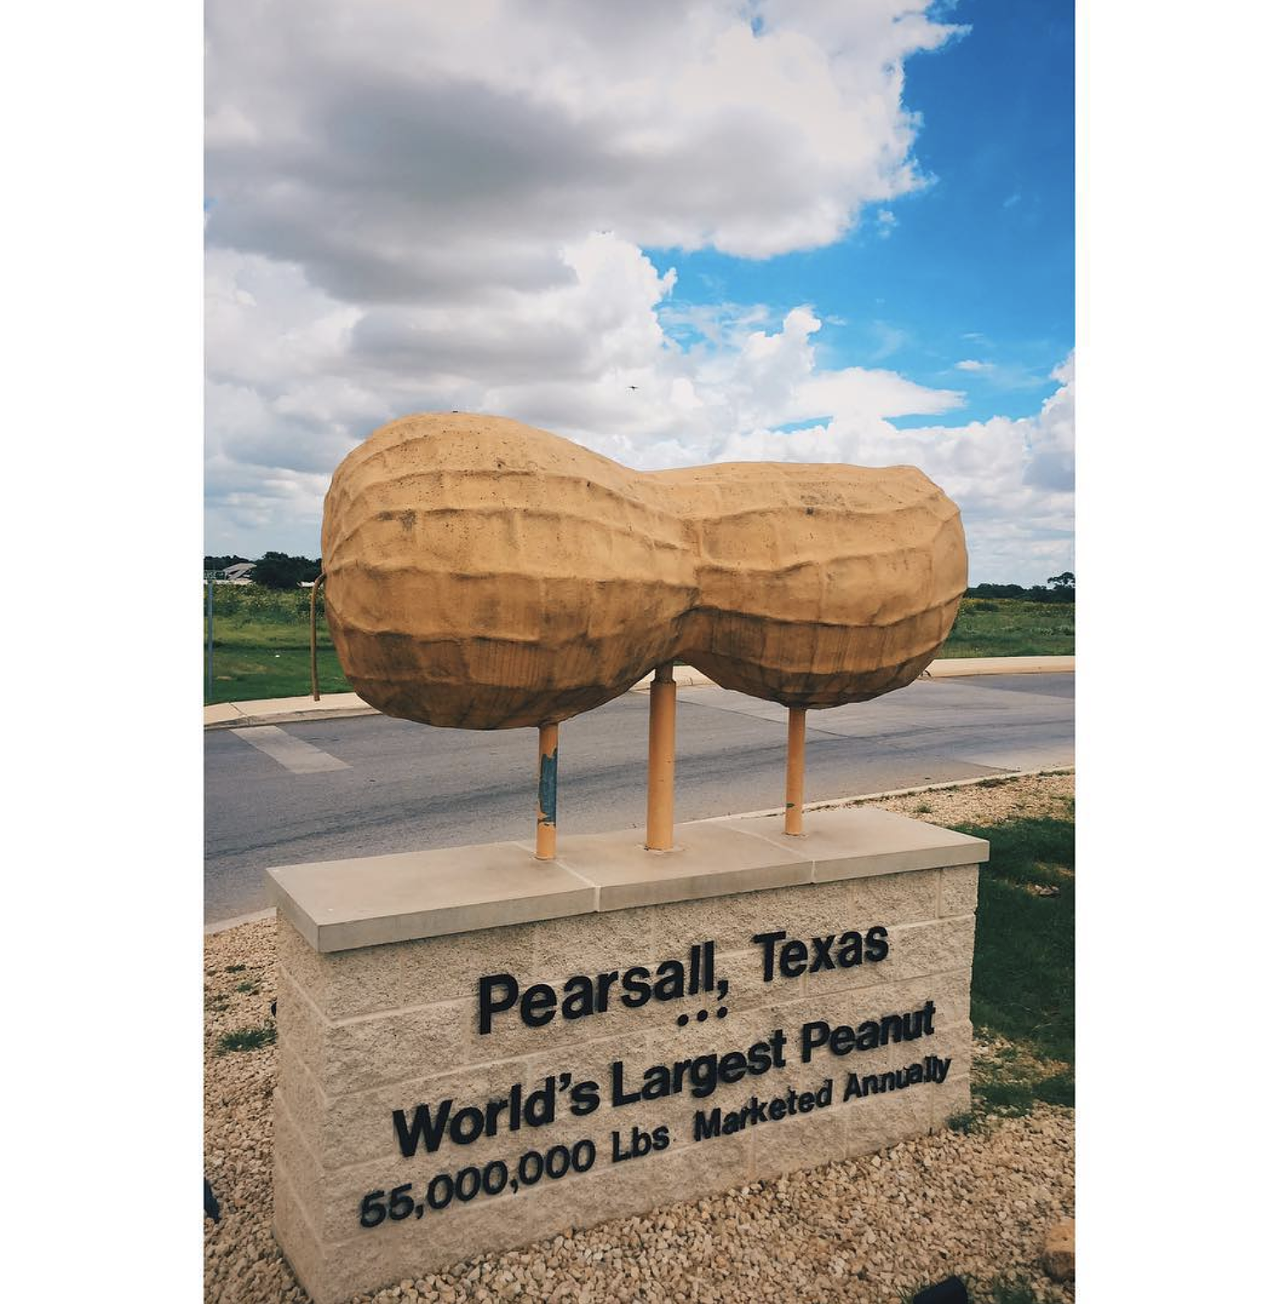 World’s Largest Peanut, Pearsall, TX
Junction of S. Treviño St. and Comal St., Pearsall, roadsideamerica.com
The World’s Largest Peanut still stands proudly after 25 years on the side of the road in Pearsall, TX. 
Photo via Instagram /  redfangoo